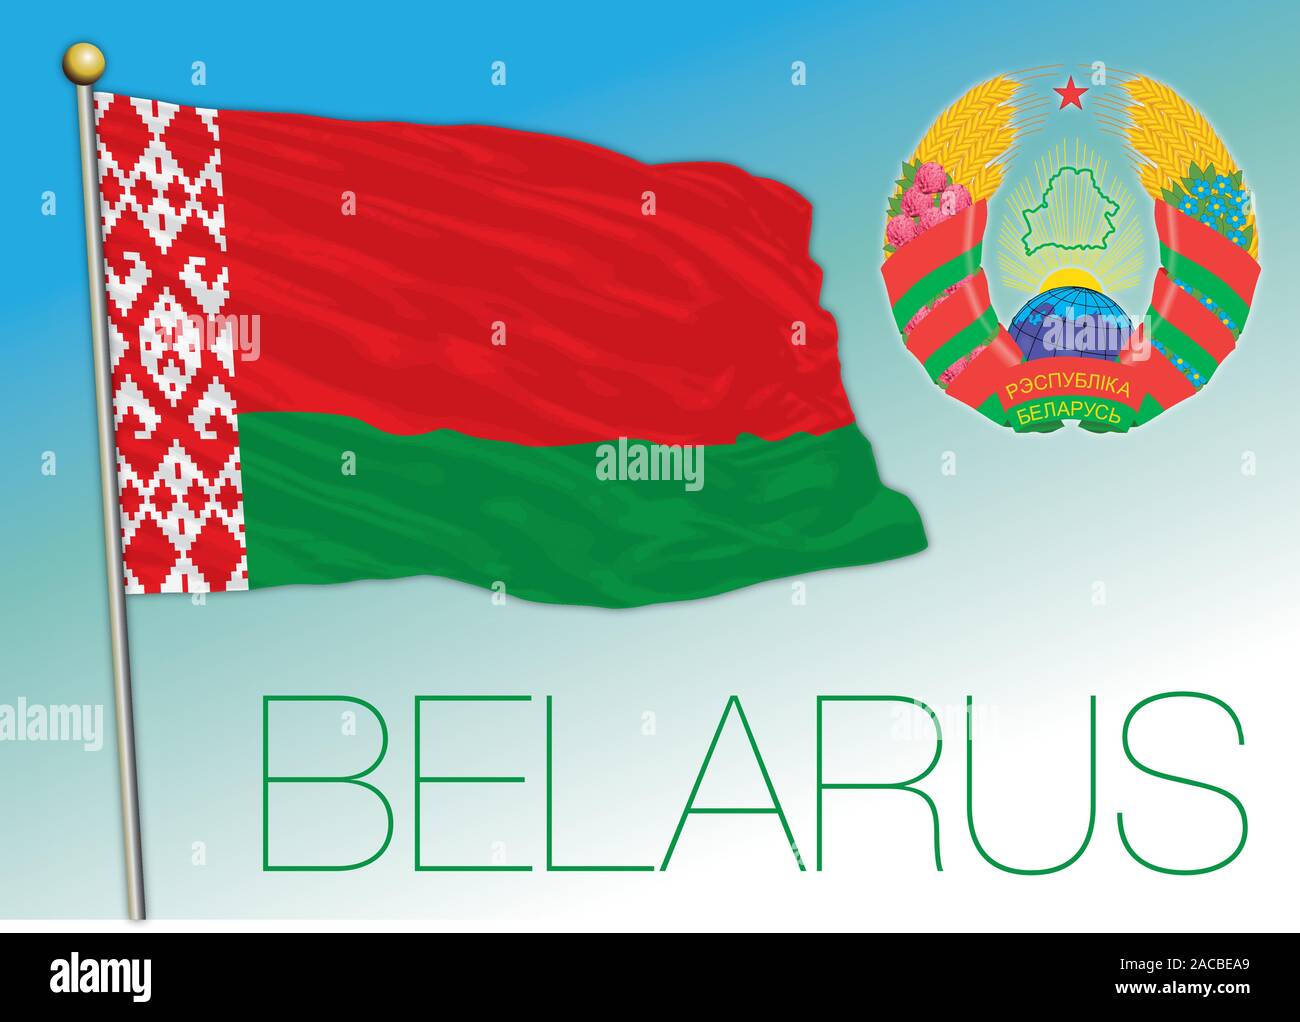 Belarus coat of arms on the national flag, vector illustration Stock Vector